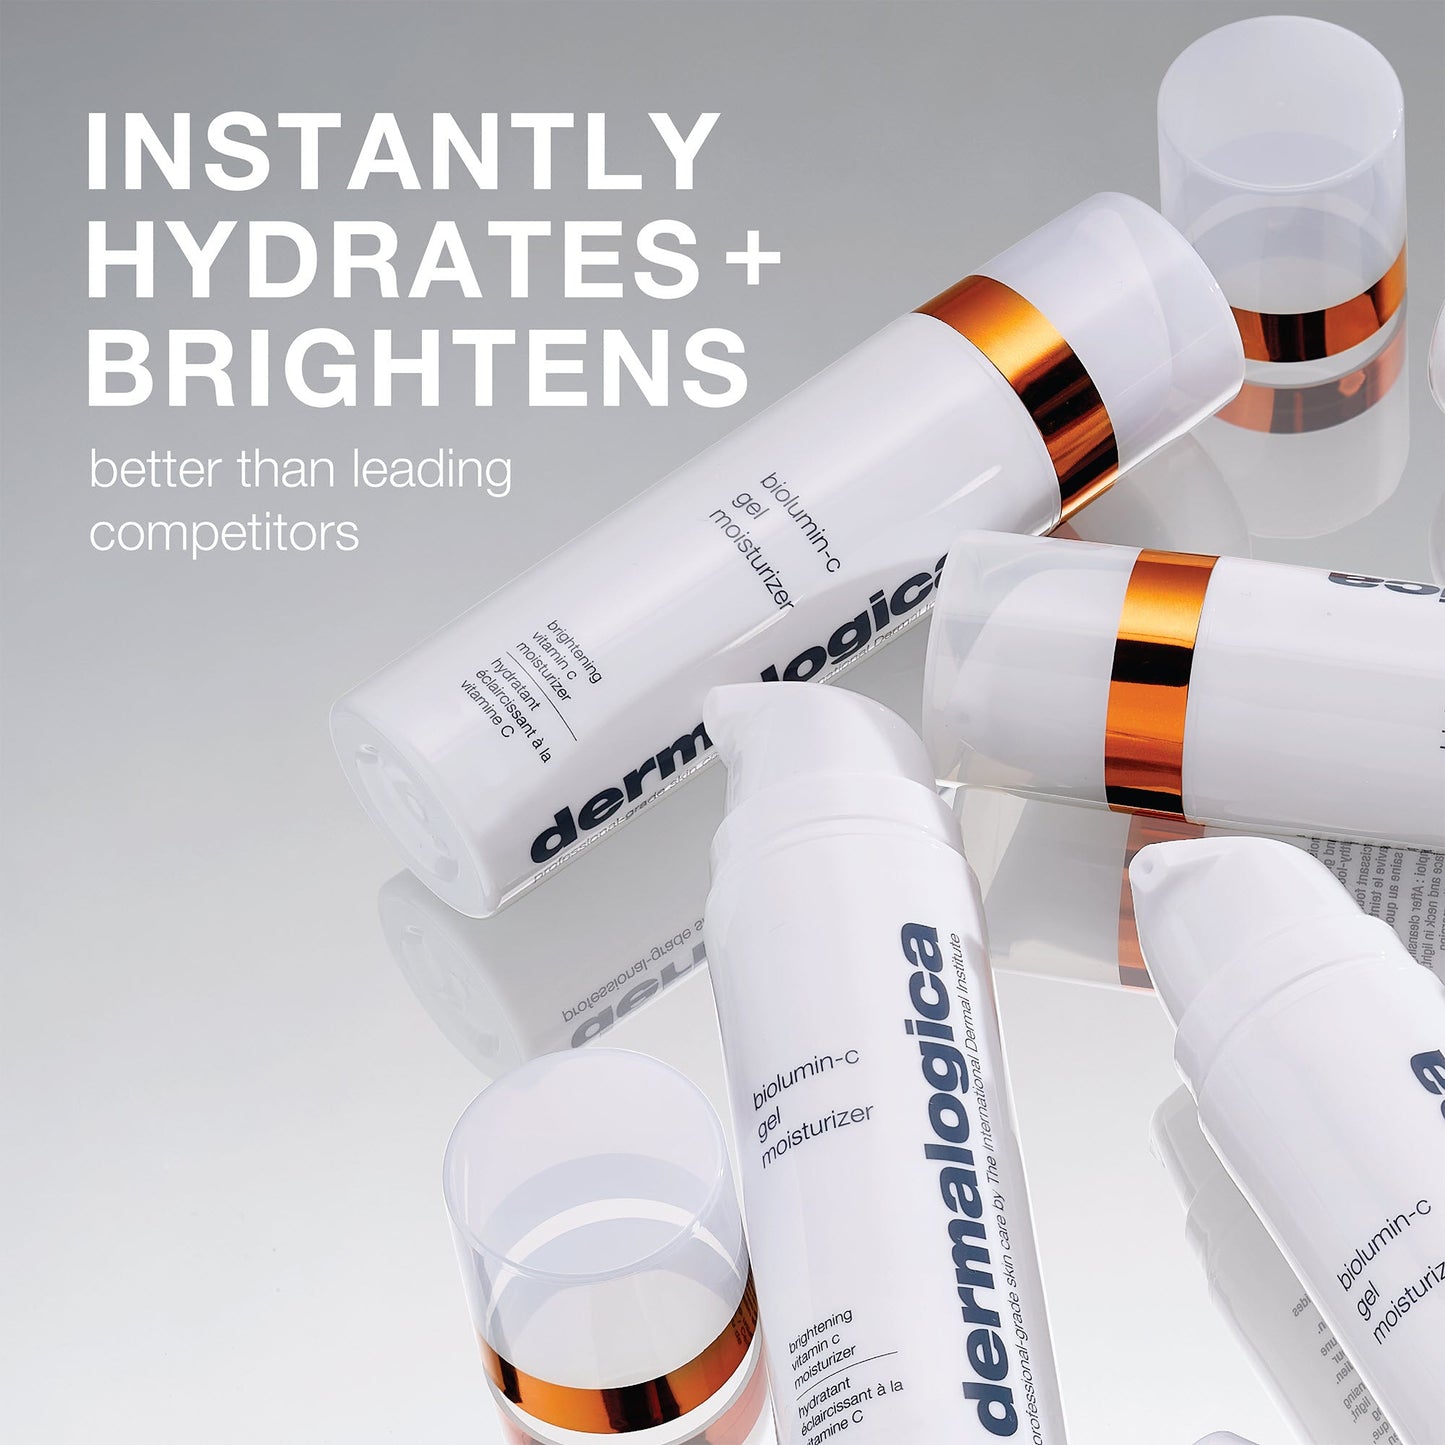 instantly hydrates + brightens better than leading competitors